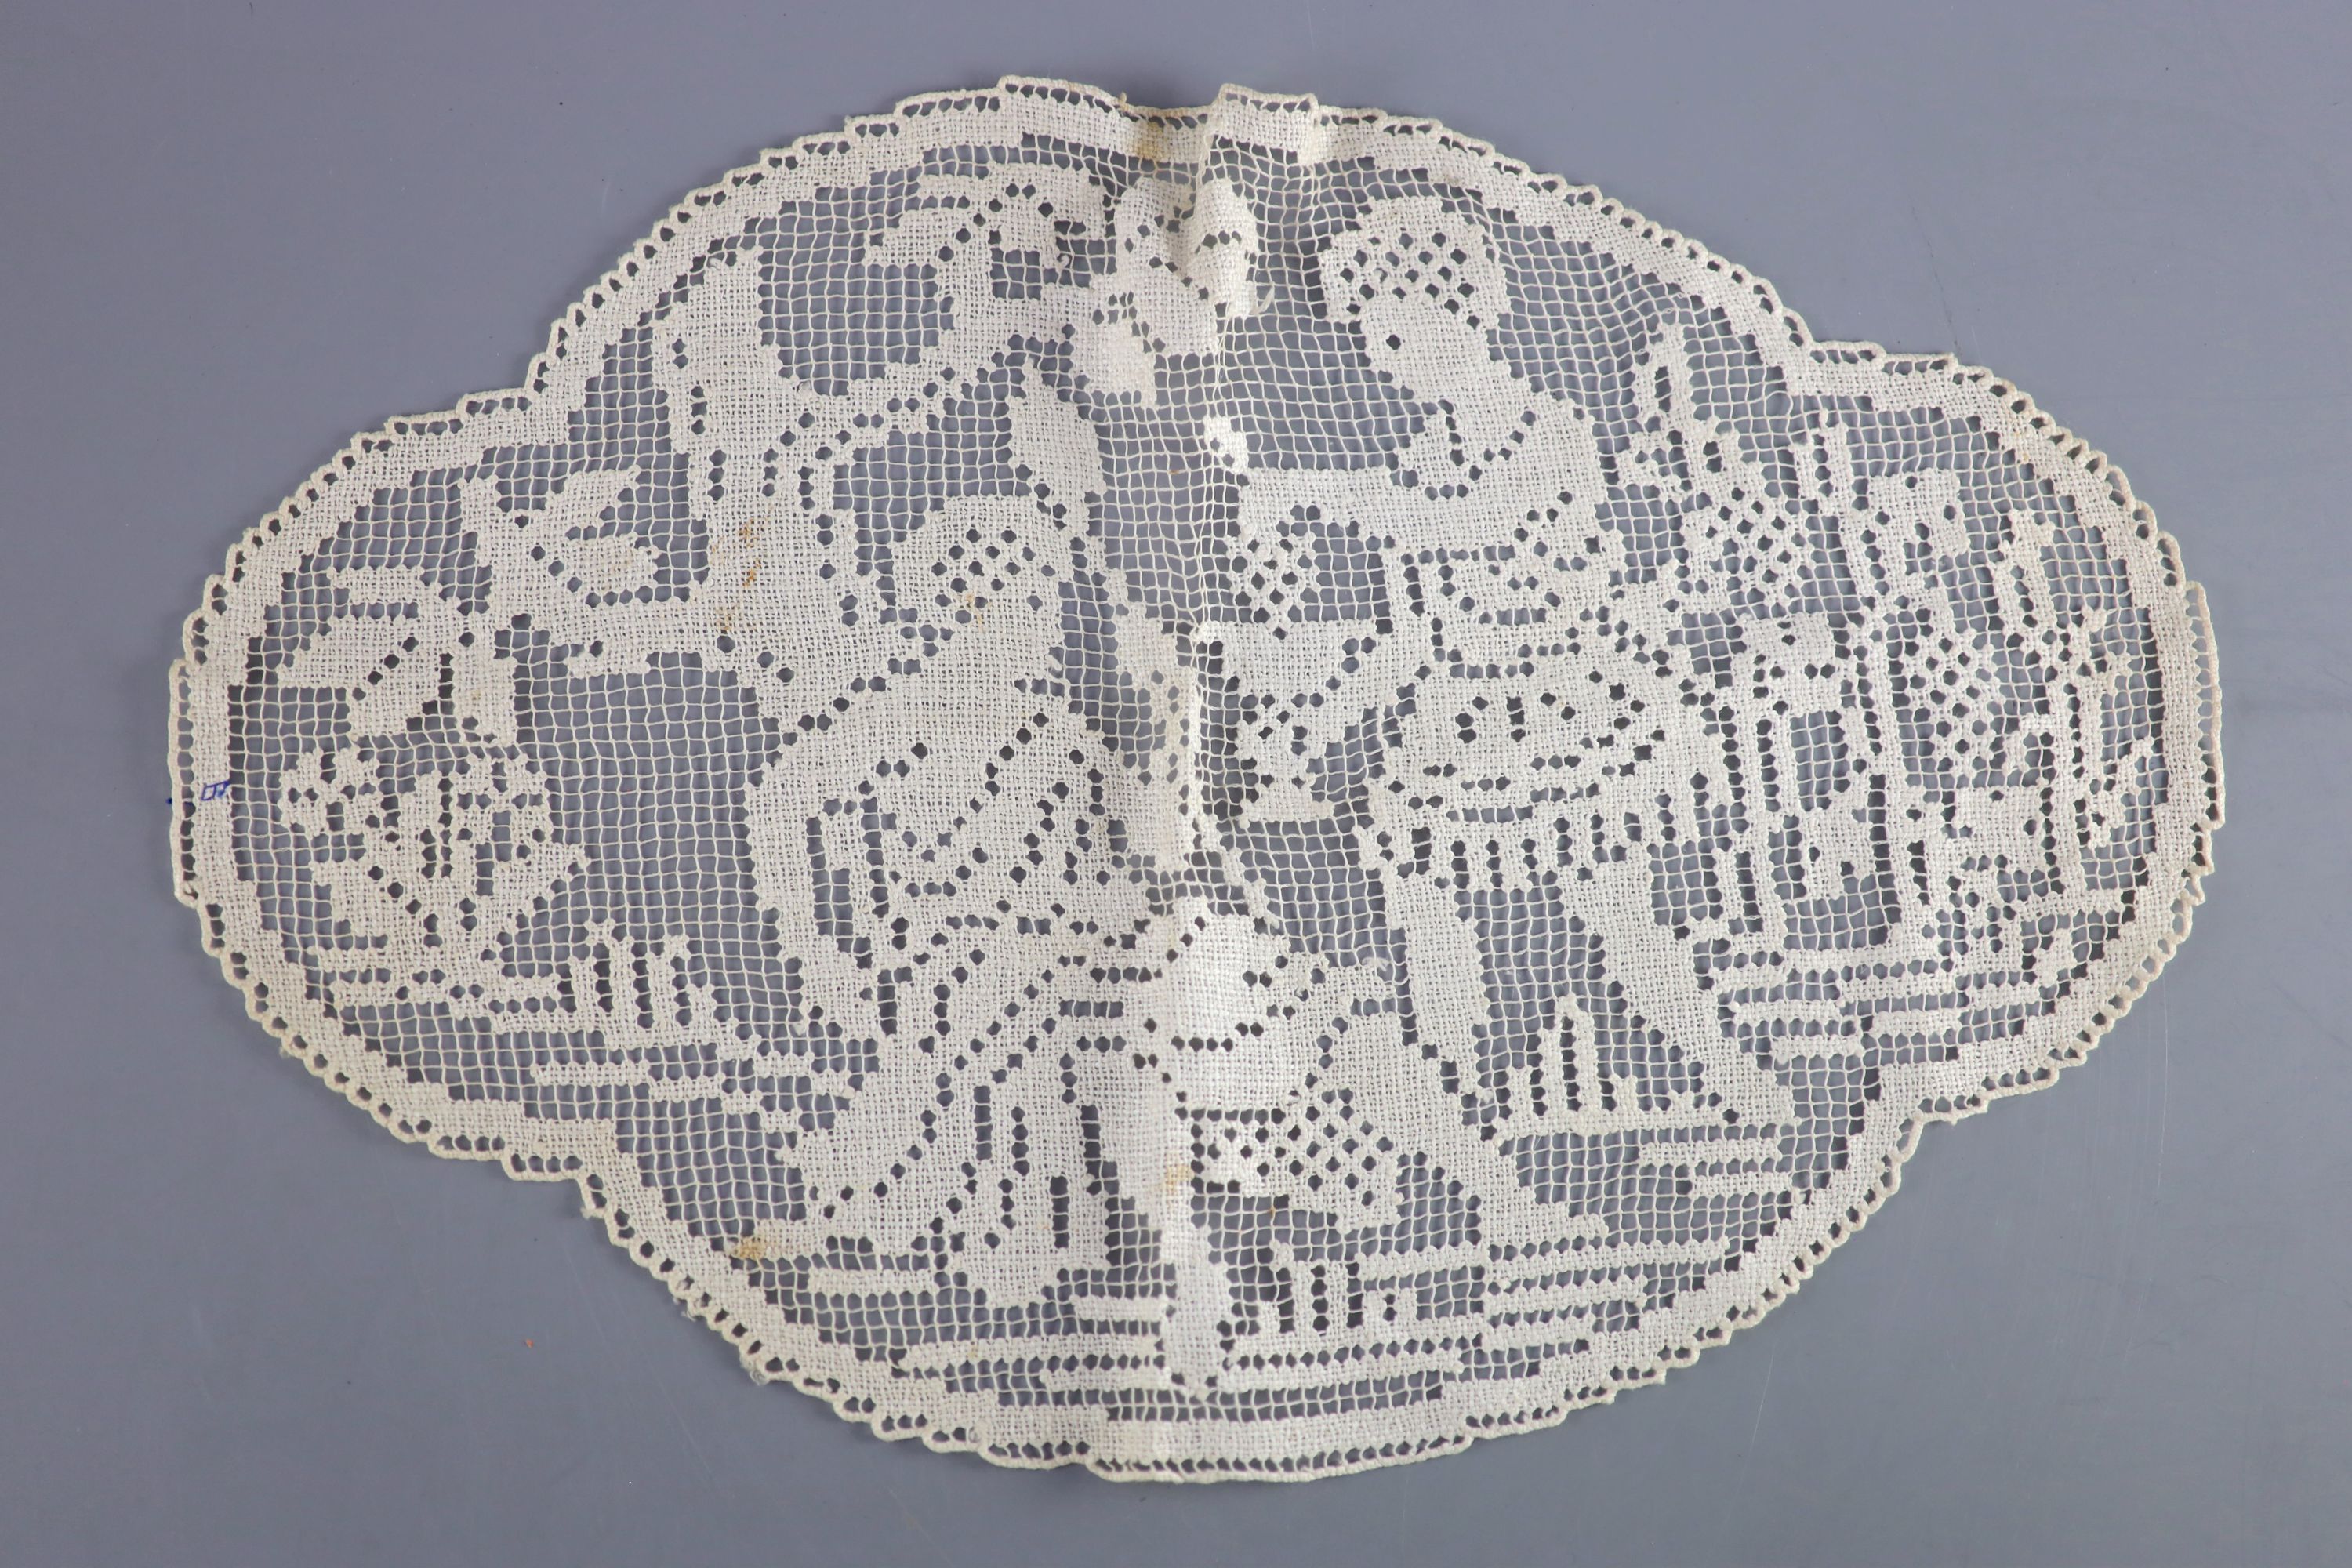 A fine white worked embroidered lace inset coverlet, a filet lace square of a figure wearing a crown (plus museum note),